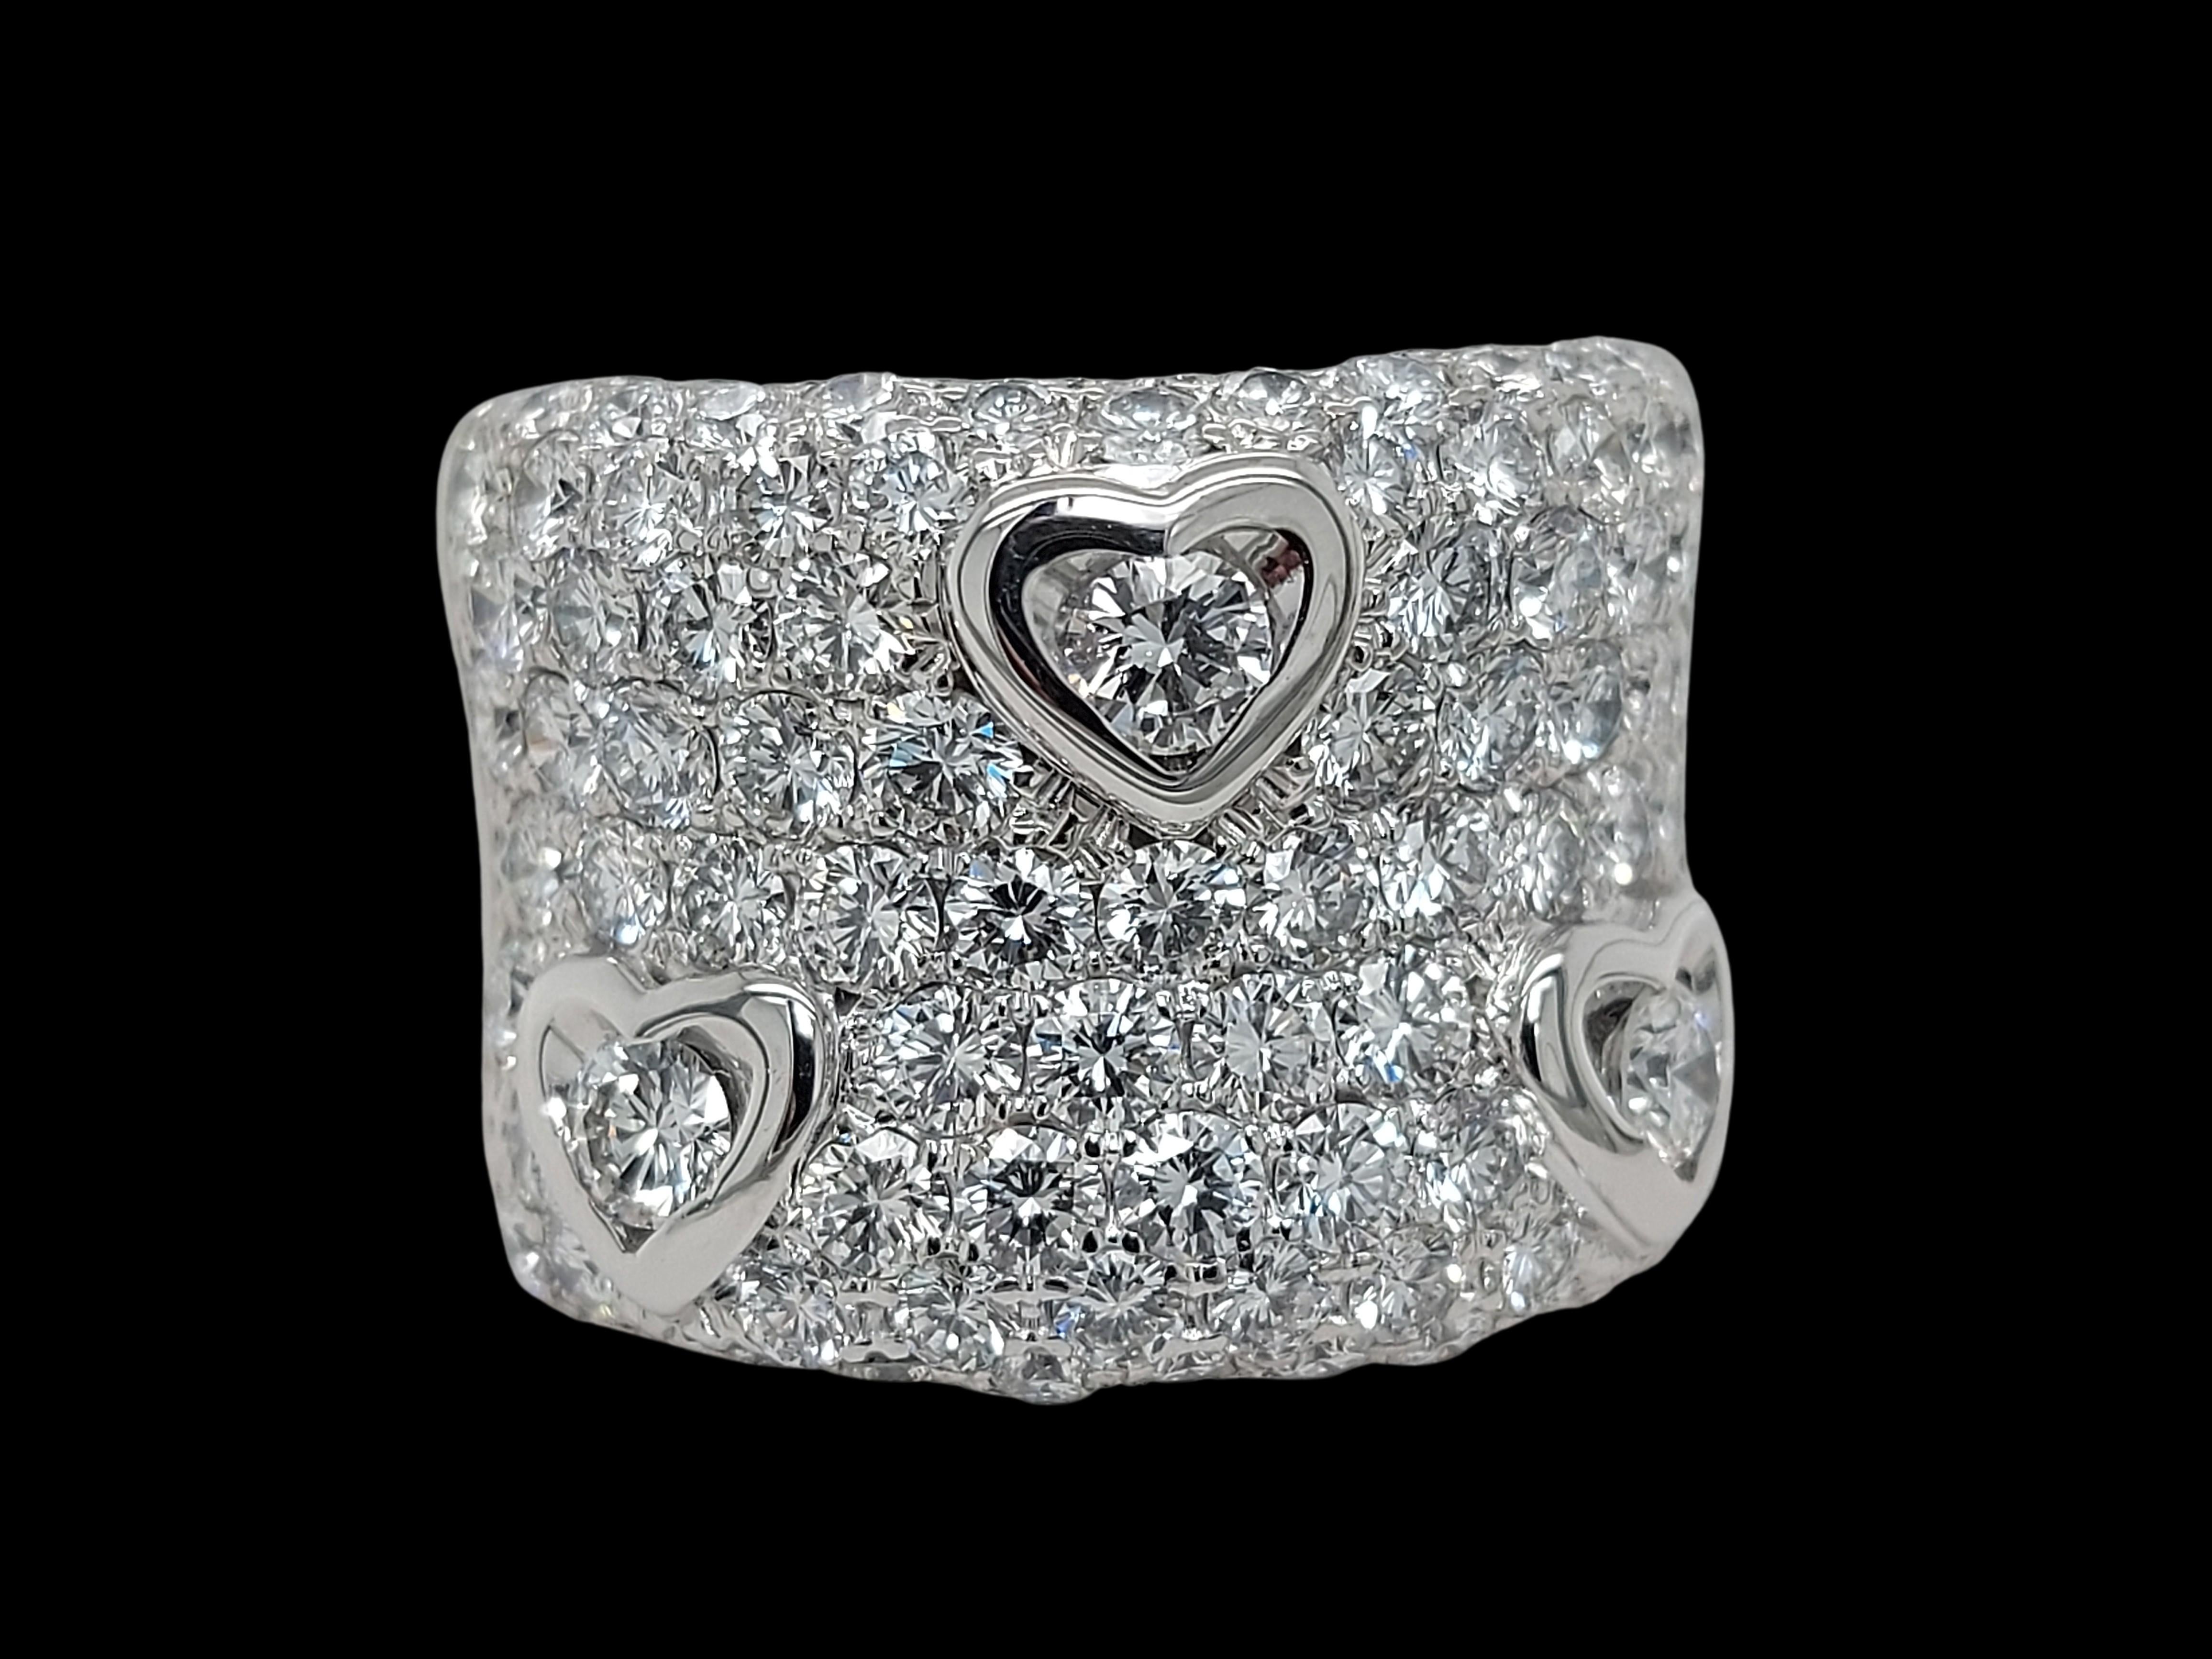 Women's or Men's Stunning 18kt Gold Ring With 5.65ct Brilliant Cut Diamonds, 3 Set in Heart Shape